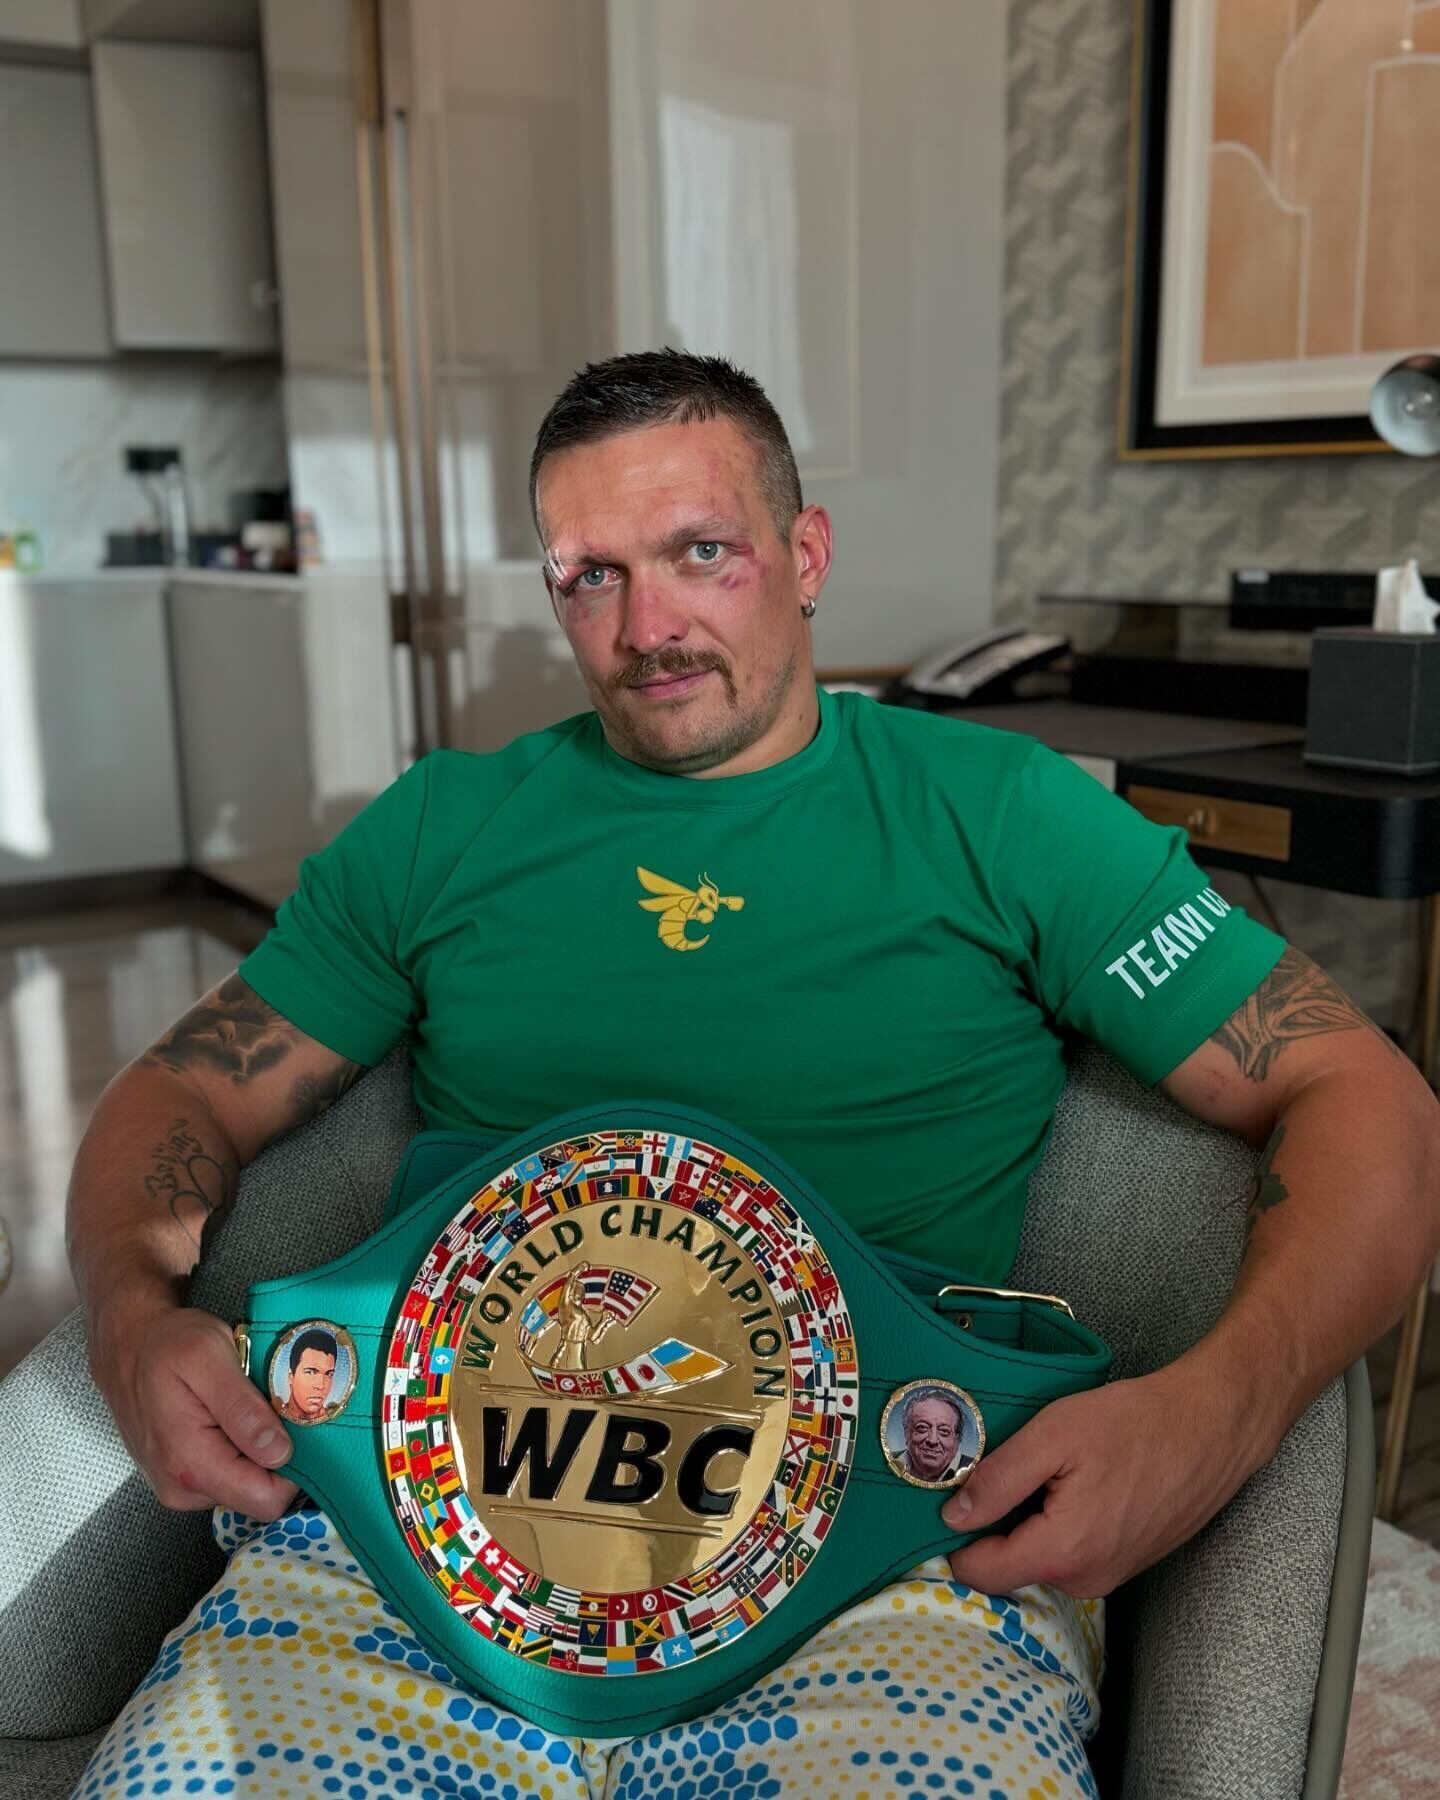 It became known how much the Usyk – Fury fight earned